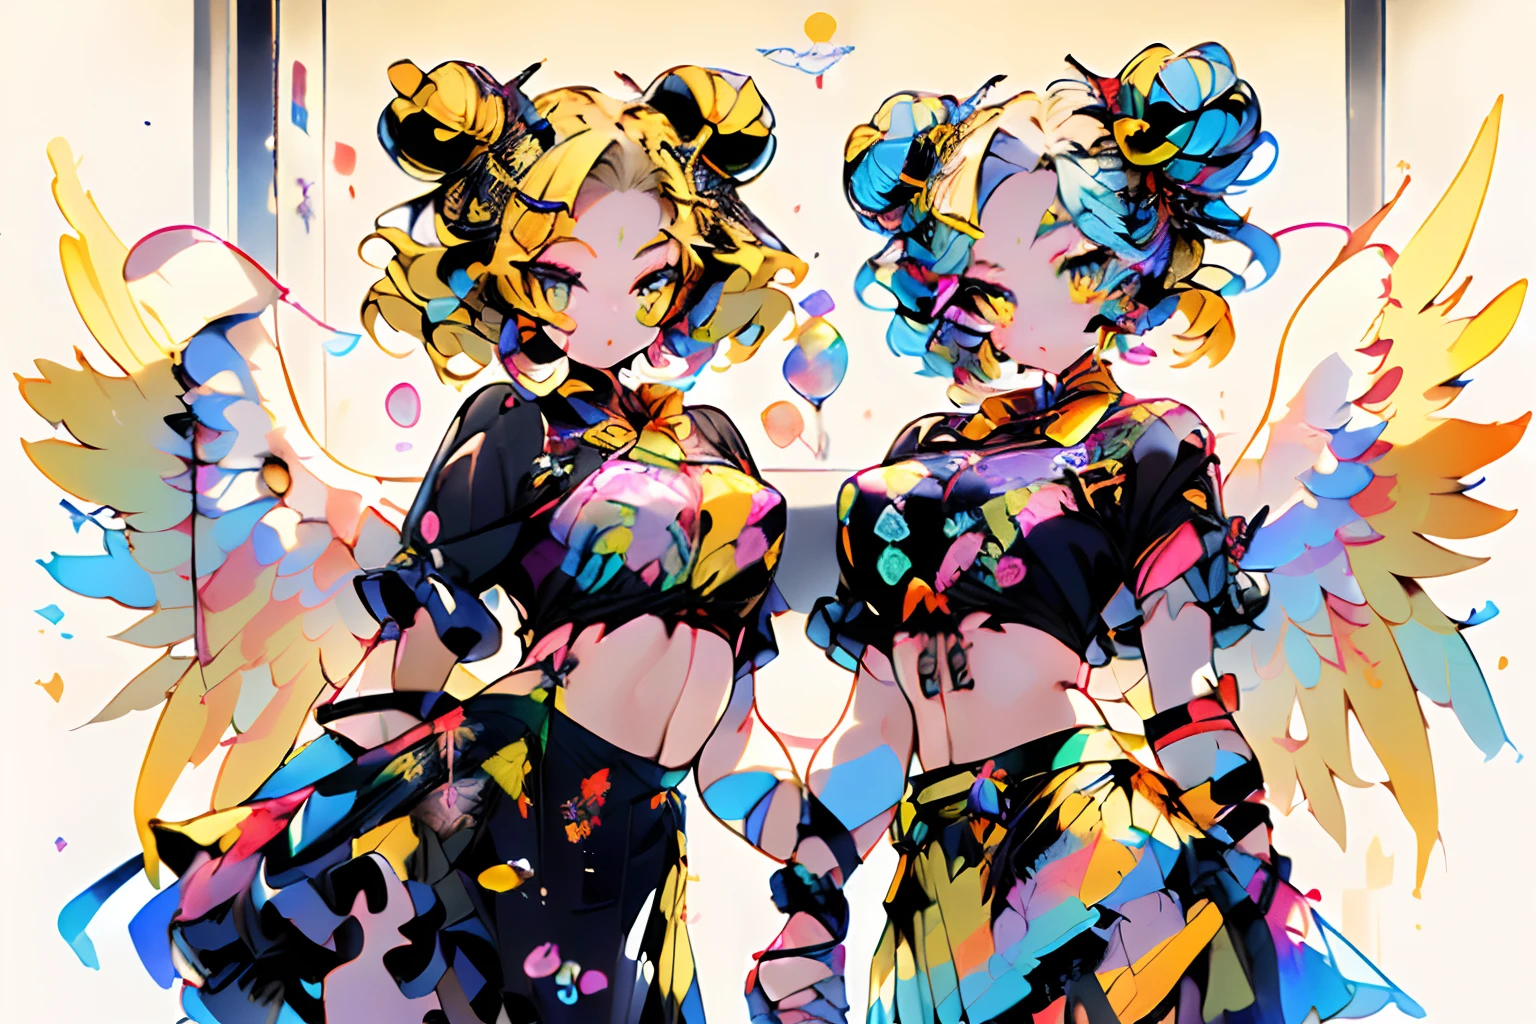 (masutepiece) ((Kaleidoscope)) ((Harmonious)) (ultra-quality) (very exquisite) (Professional Balance) (absurderes) (Wide Shot) (One woman) ((Upper body)) ((fullllbody)) ((G Cup Breasts)) (Fine-grained body lines) ((realisitic:0.75)) (zettai ryouiki) (Hi-Res Textures) (Clearly draw the shape of the nose) ((Exposure 1:0.25)) (((Shiny skin))) (x hair ornament) (Ornament Heart(Bracelet、choker、ear ornament) (((((Beautiful little bun hair in yellow color))))) (Wave hair) ((((faithfully、Depiction of correct finger alignment)))) ((((faithfully、Depiction of the correct hand)))) (It clearly depicts the reflection of small white light in the pupil, which adds depth to the pupil) (((top-quality、Elegant yellow detail eyes))) (((Ultra Definition Masterpiece Highest Quality:1.2 4DCG high quality))) (Highly detailed face and eyes) (24-year-old woman) (Model body type) (Slender and long legs) (A slender) (mascara) (eyeshadows) (eye liner) (Glossy lipstick) (lip stick) (((((Rainbow × Angel Ribbon× Micro Micro Bikini × Ruffles))))) (((((Boob Pudding G Cup))))) (Photorealsitic) (8K Character Concept) (((32K HD image quality...)) (conputer graphics) (angelicales、pastelle、Feather 1:1.5) (((((Uniform Skirt Mini))))) (Freedom of movement、evolve) (((Add charms to the background))) ((((angelicales)))) ((((Angel's Big Wings 1:1))) ((((Background school hallway))))) (((crosswind))) (((panchira))) (((Skirt that holds down by hand))) (crosswind) (Flip-up) (((Marilyn Monroe))),nardack,,extended downblouse, large breasts, shirt, nsfw,, more prism, vibrant color,